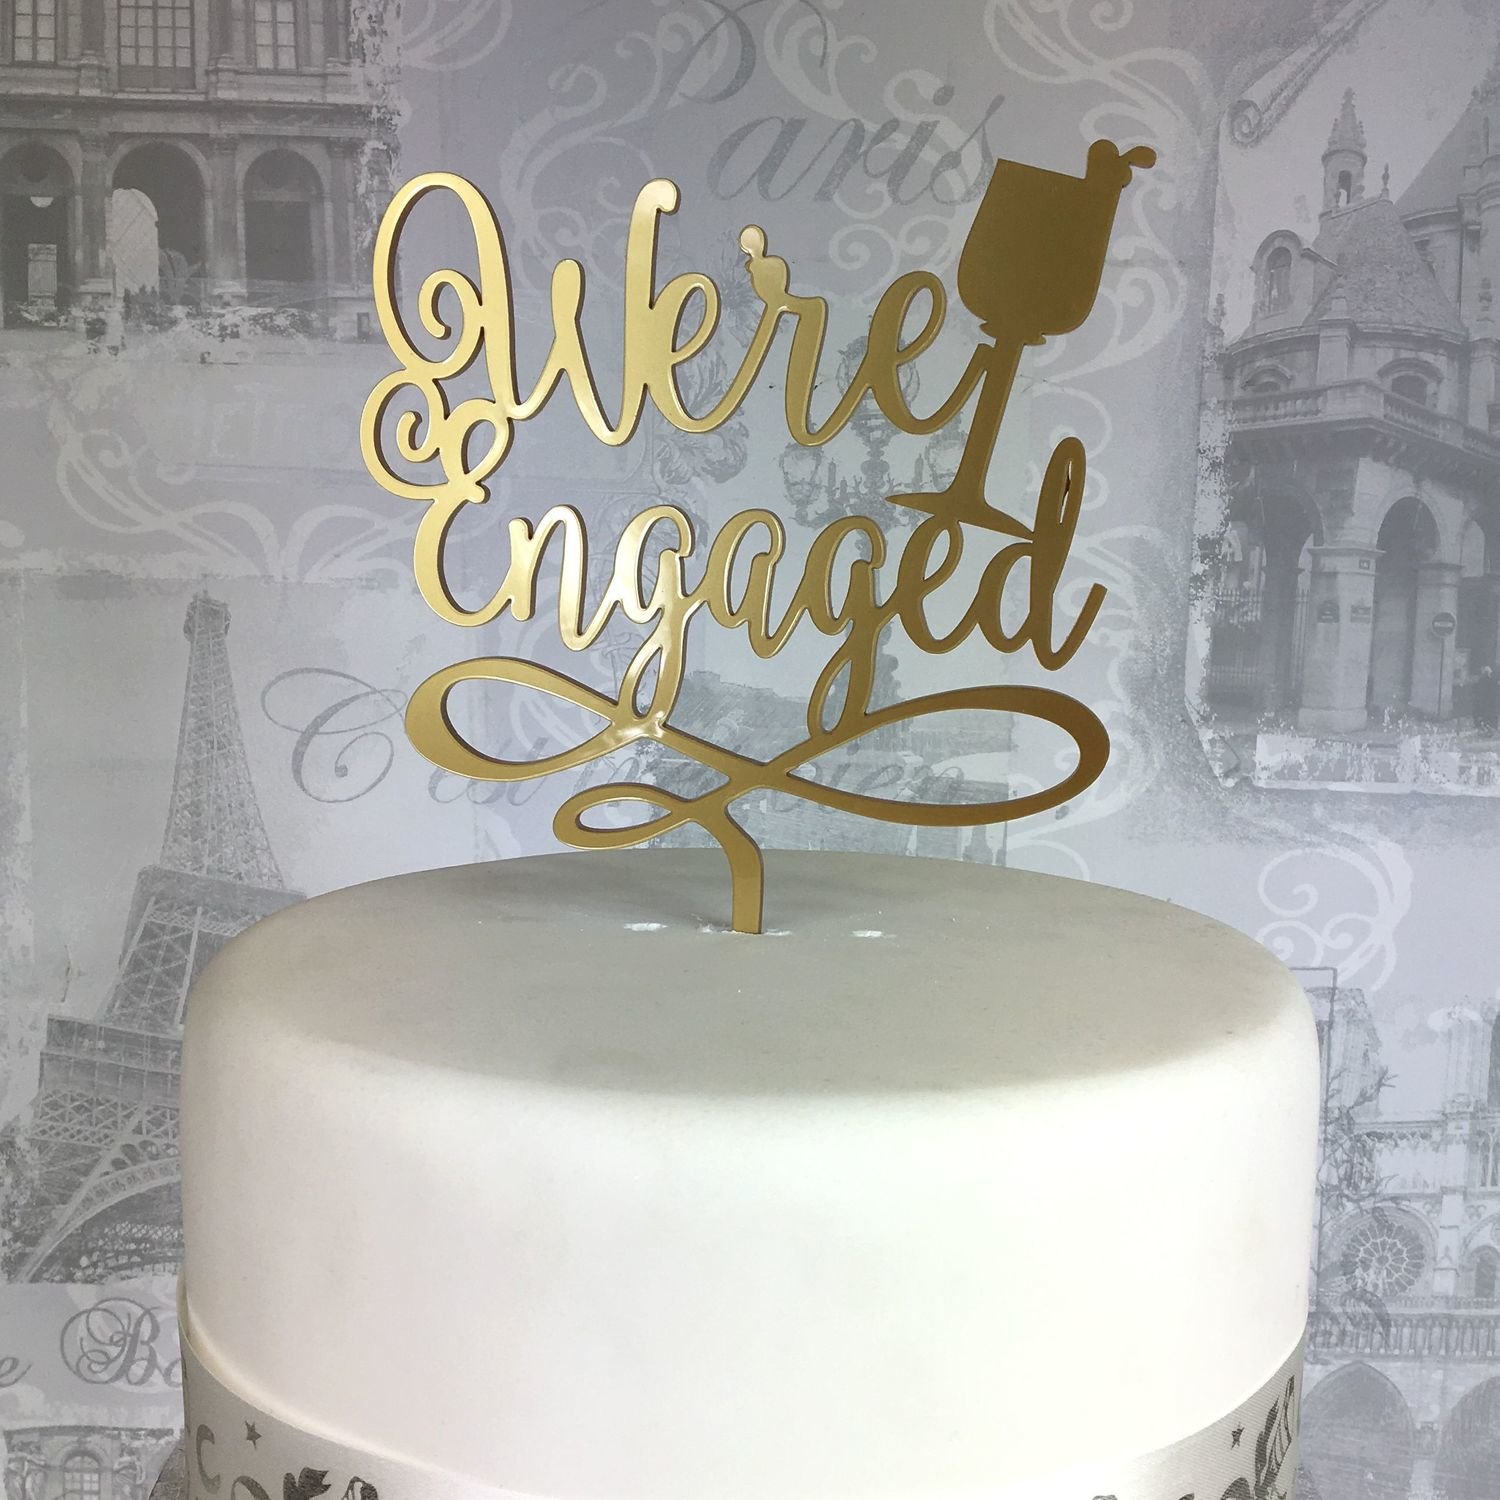 We're Engaged cake topper